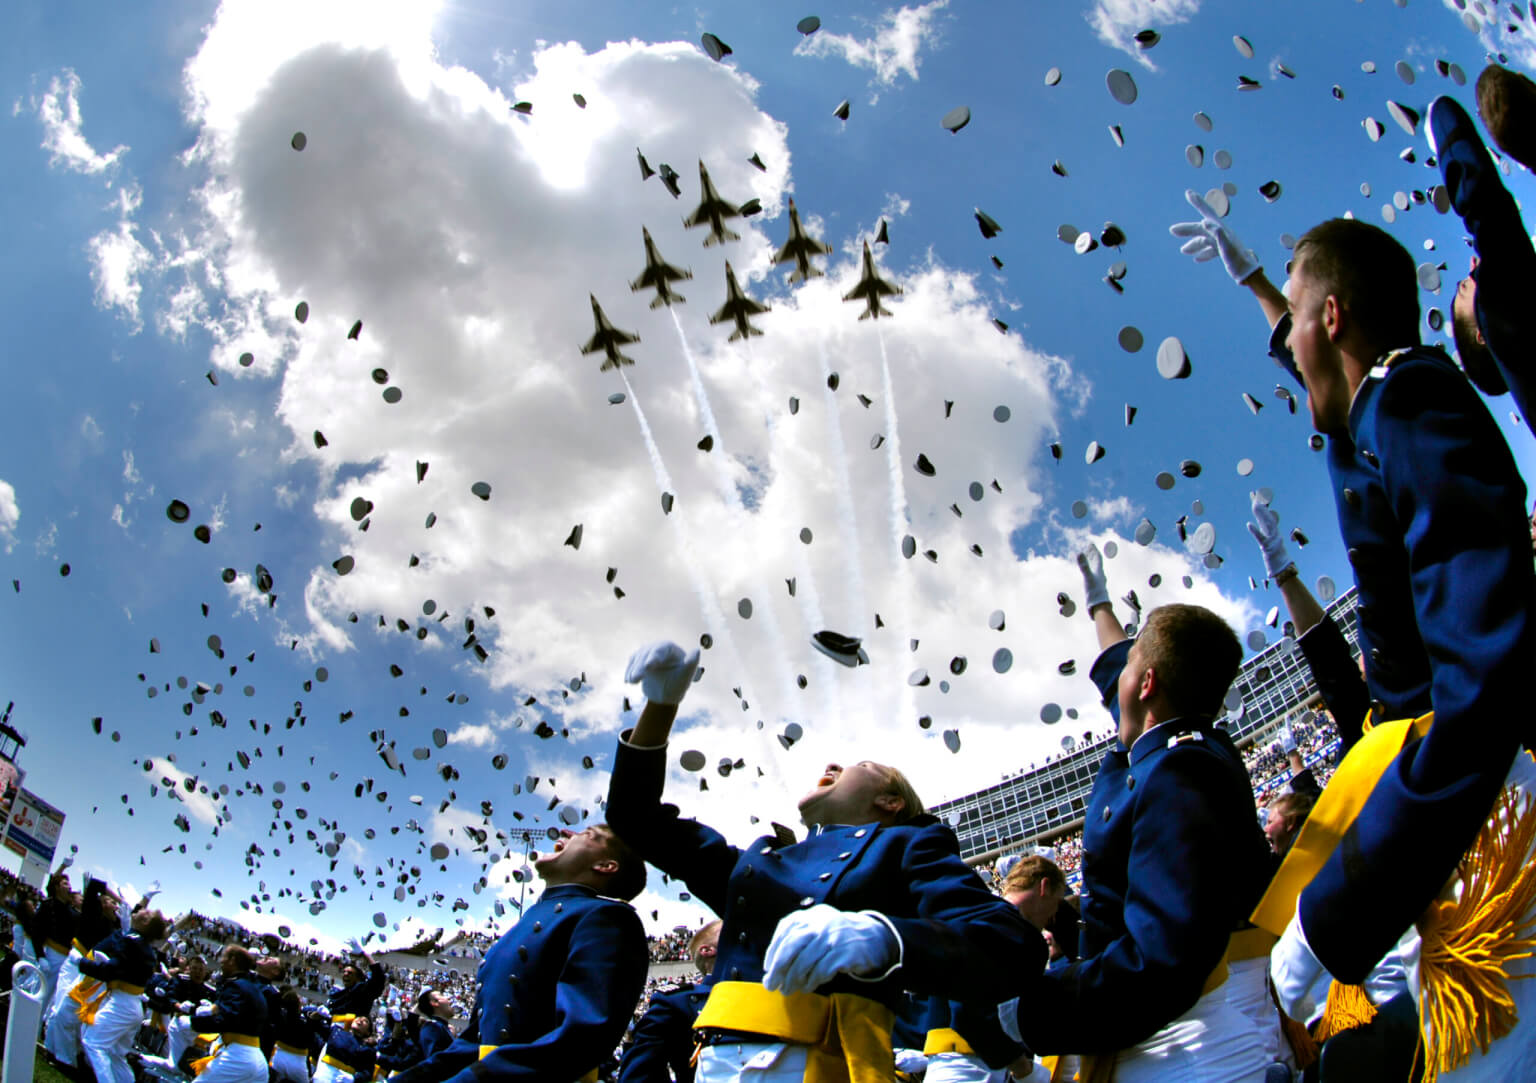 Cadets tossing hats in air at graduation